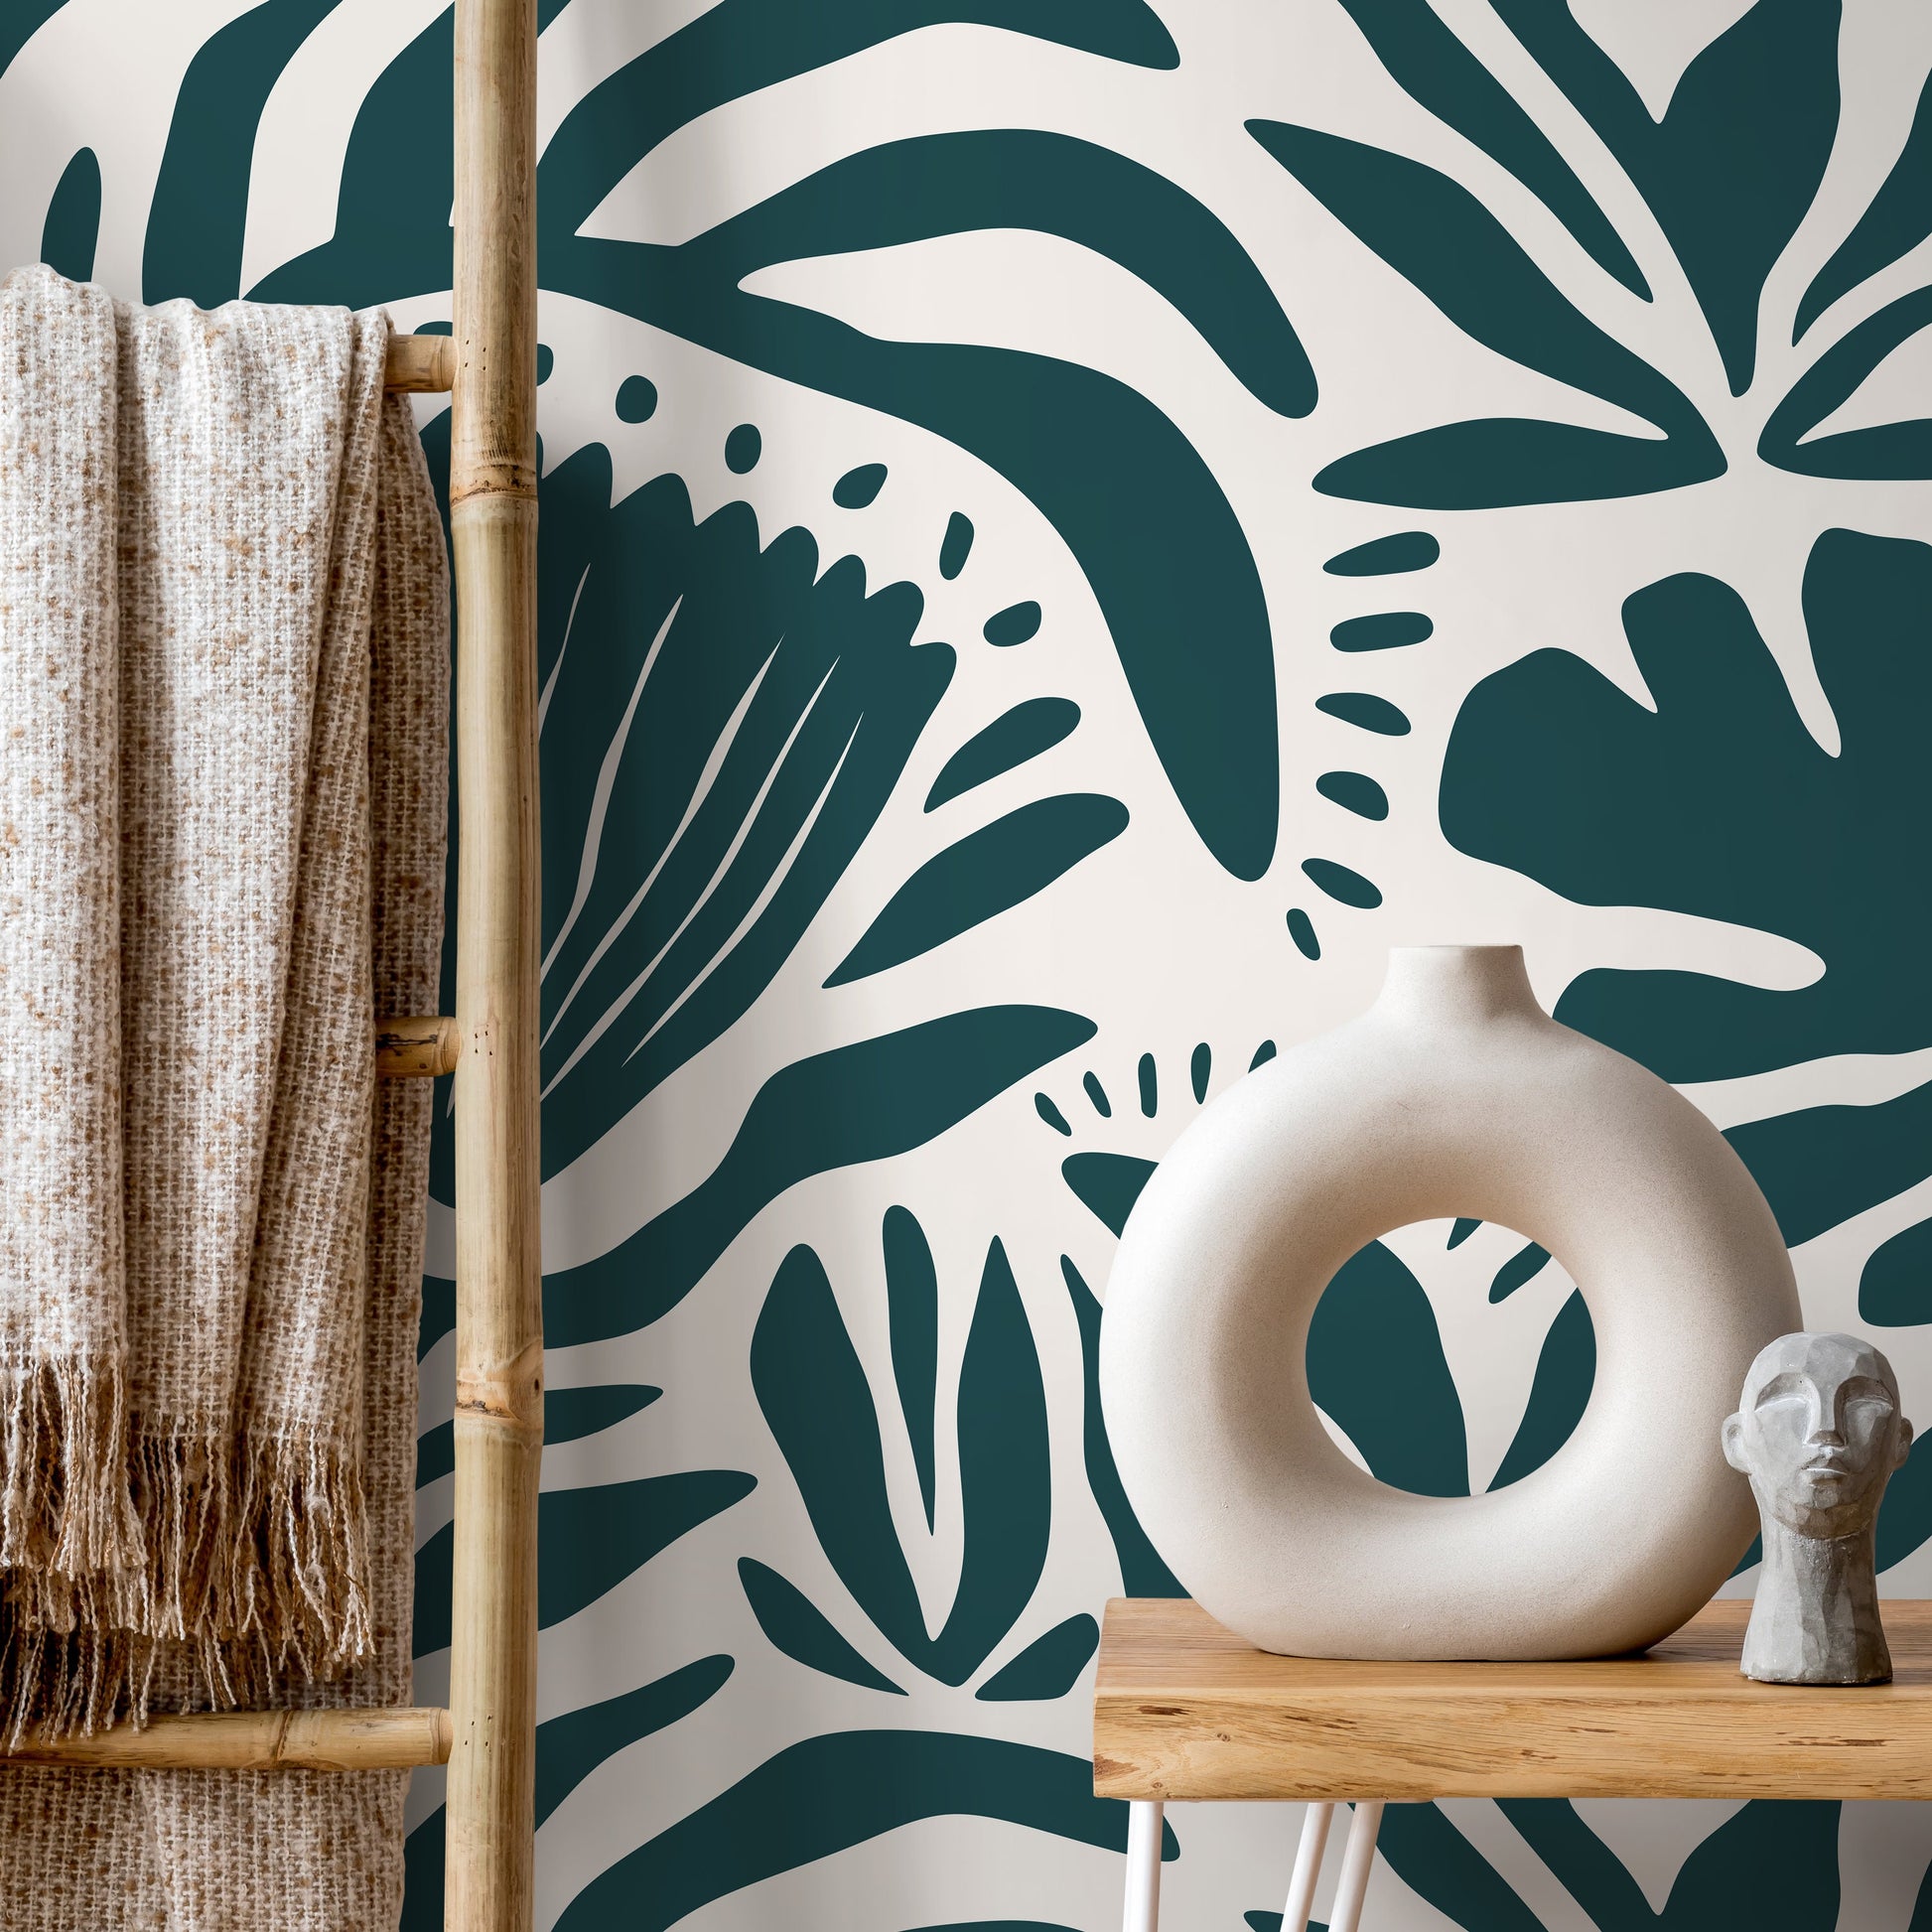 Green Abstract Floral Wallpaper Modern Wallpaper Peel and Stick and Traditional Wallpaper - D707